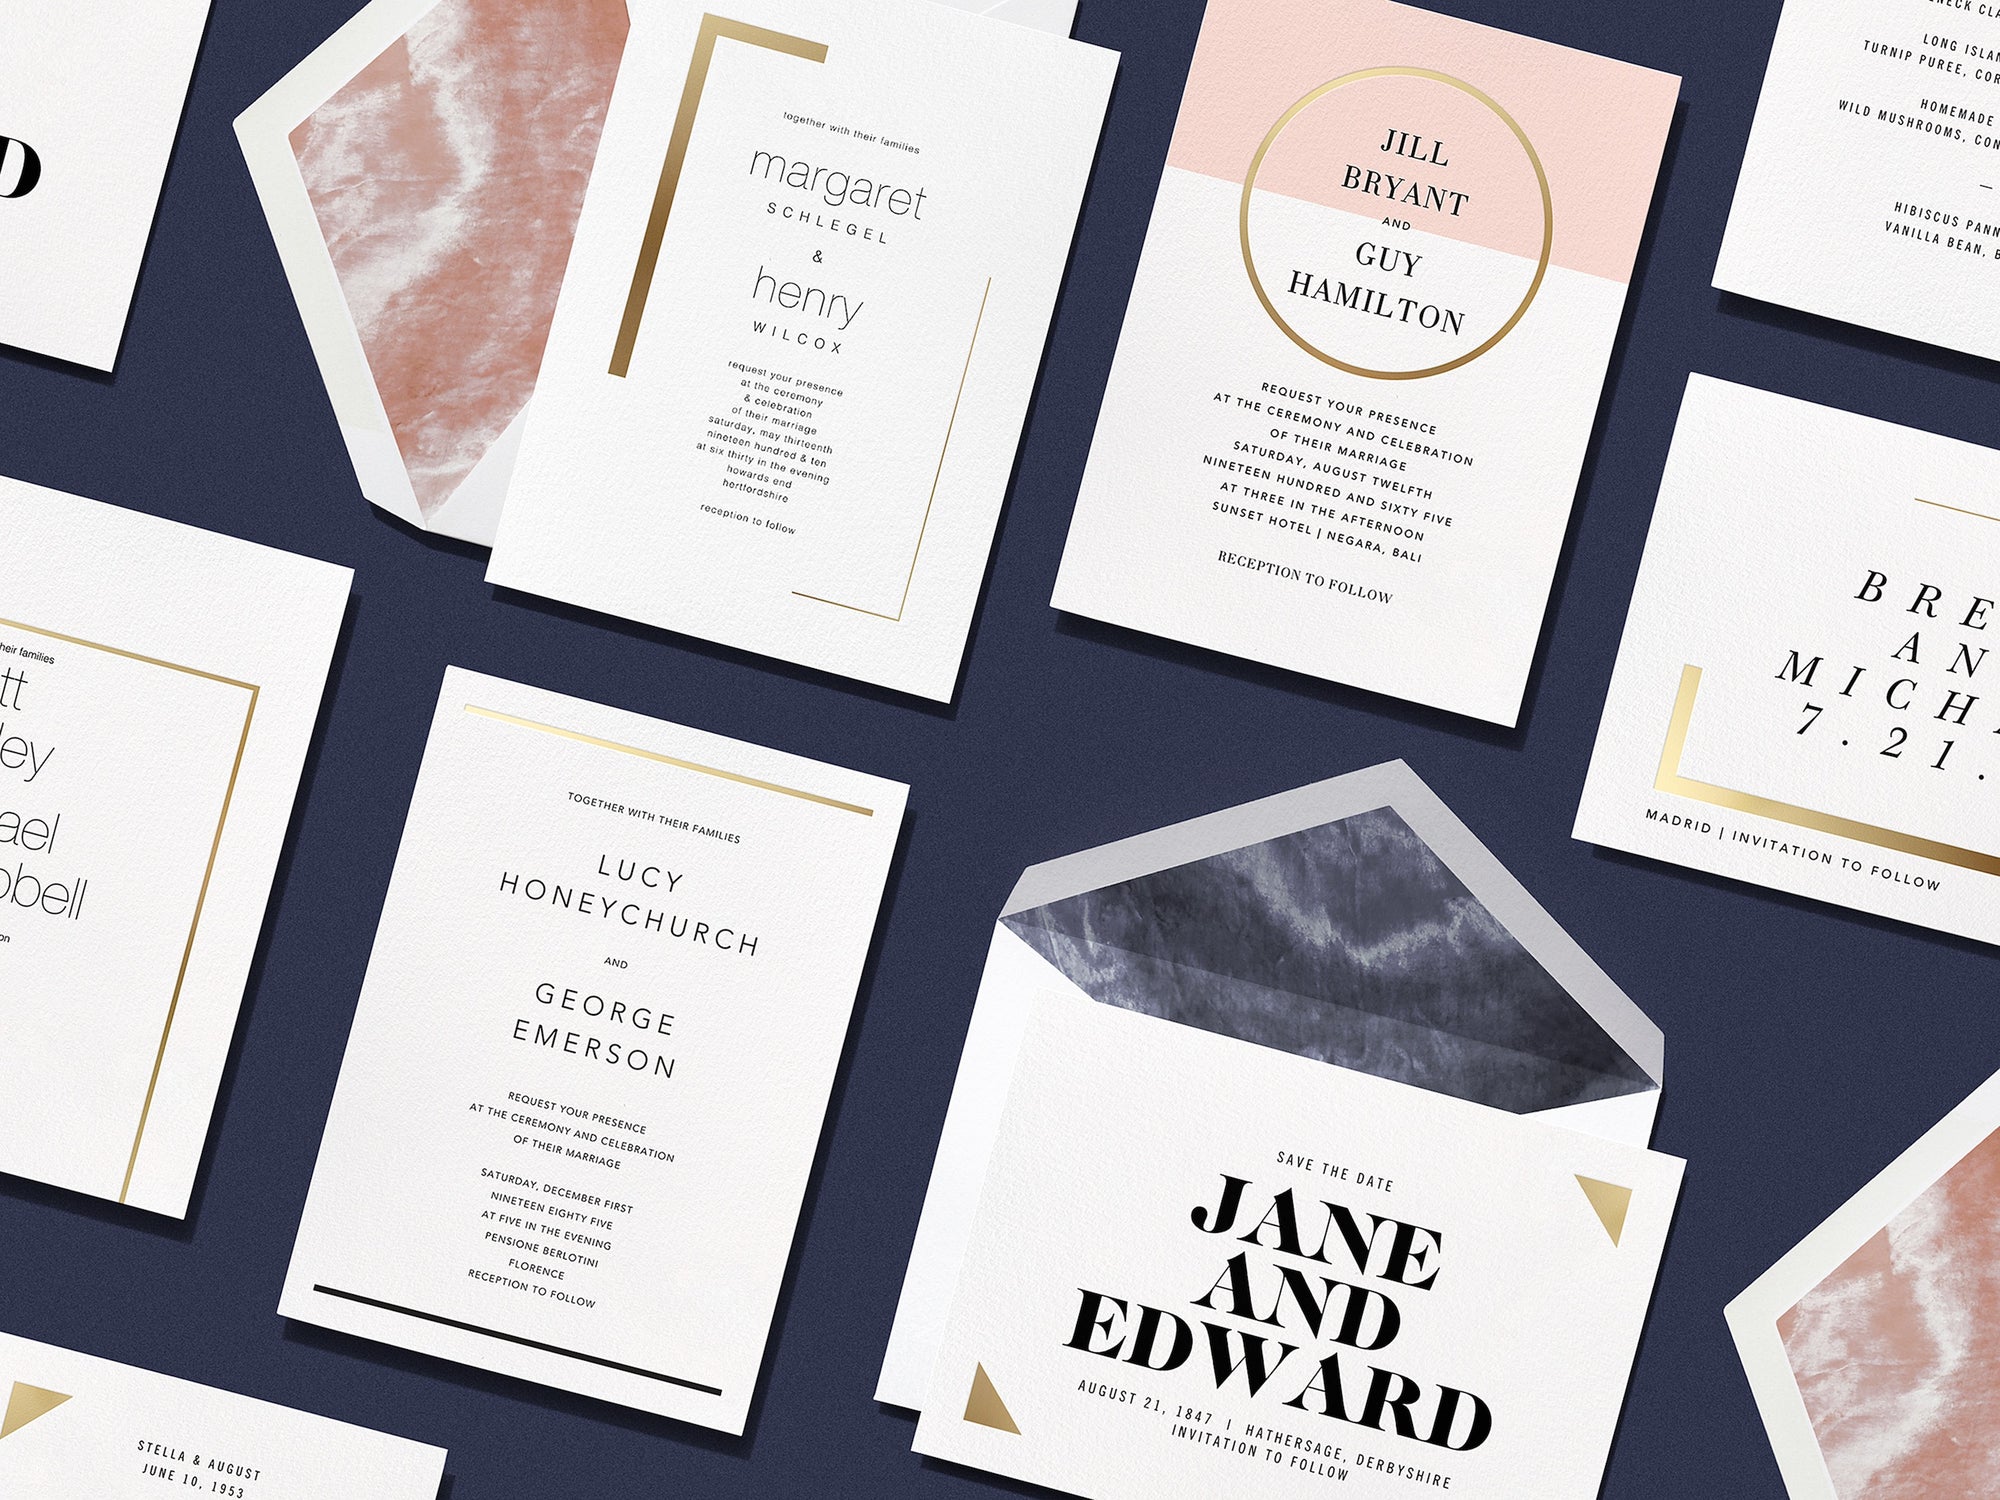 You're Invited! Invitation Design for Every Occasion - gestalten US Shop